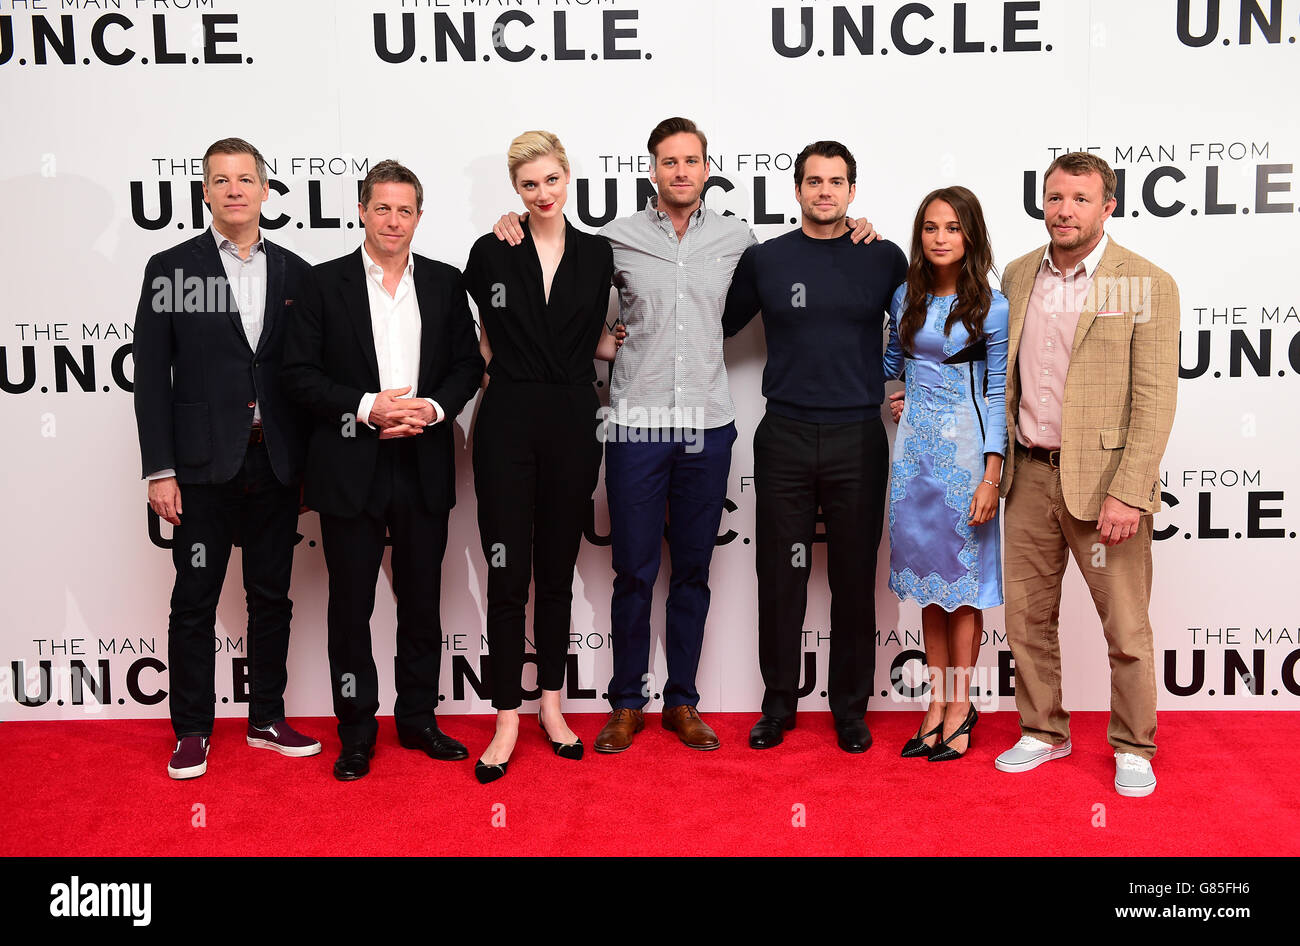 (Left to Right) Lionel Wigram, Hugh Grant, Elizabeth Debicki, Armie Hammer, Henry Cavill, Alicia Vikander and Guy Ritchie attending the Man From U.N.C.L.E photocall held at Roundtables at Claridges, London. PRESS ASSOCIATION Photo. Picture date: Thursday July 23, 2015. Photo credit should read: Ian West/PA Wire Stock Photo